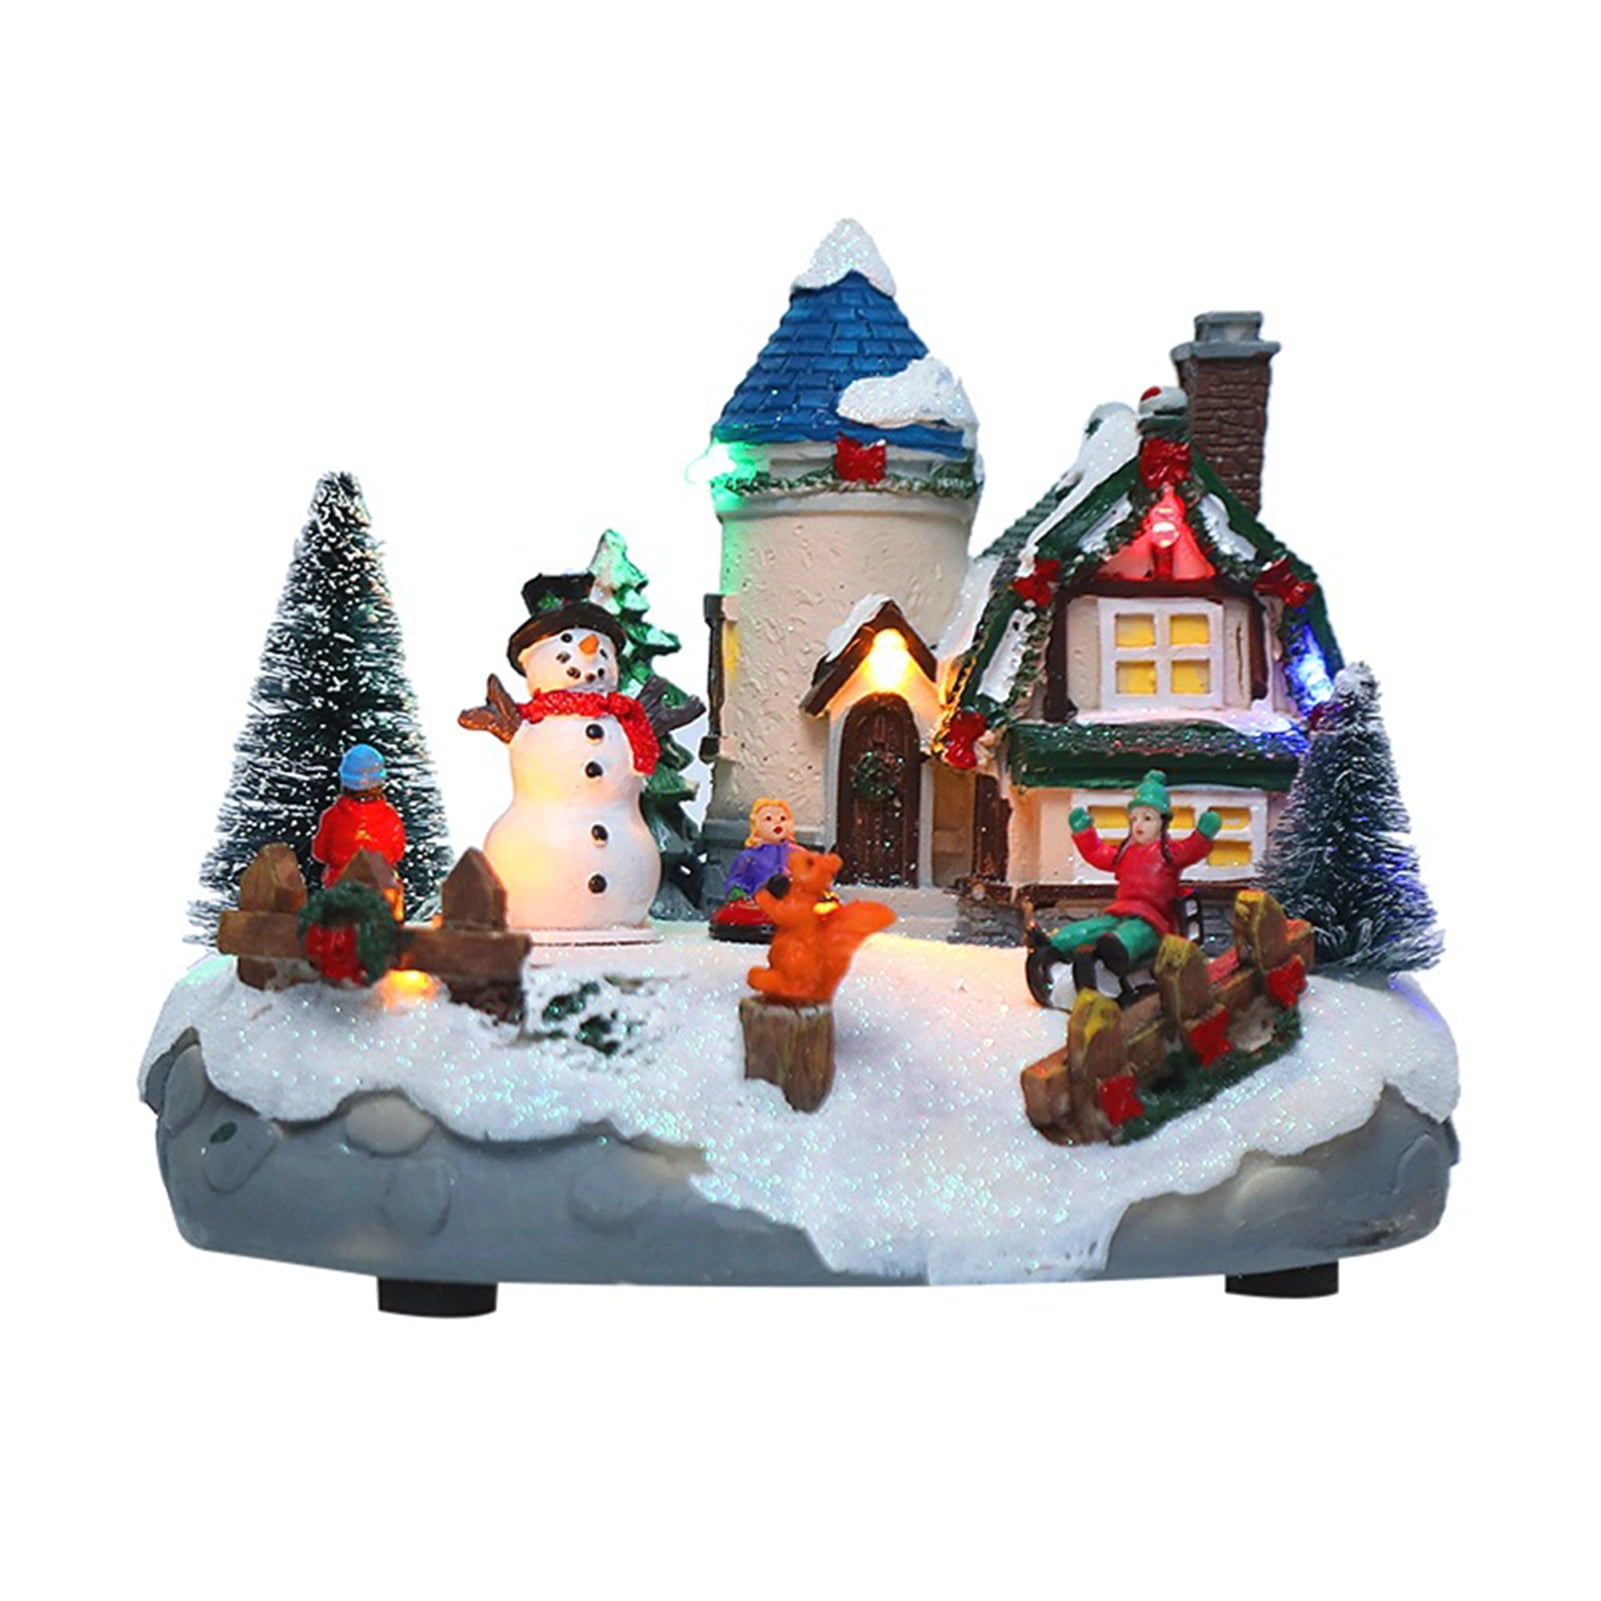 Christmas Village Building, Winter Snow Luminous Music Village with Snowman and Christmas for Christmas Decor Holiday Gifts - Walmart.com